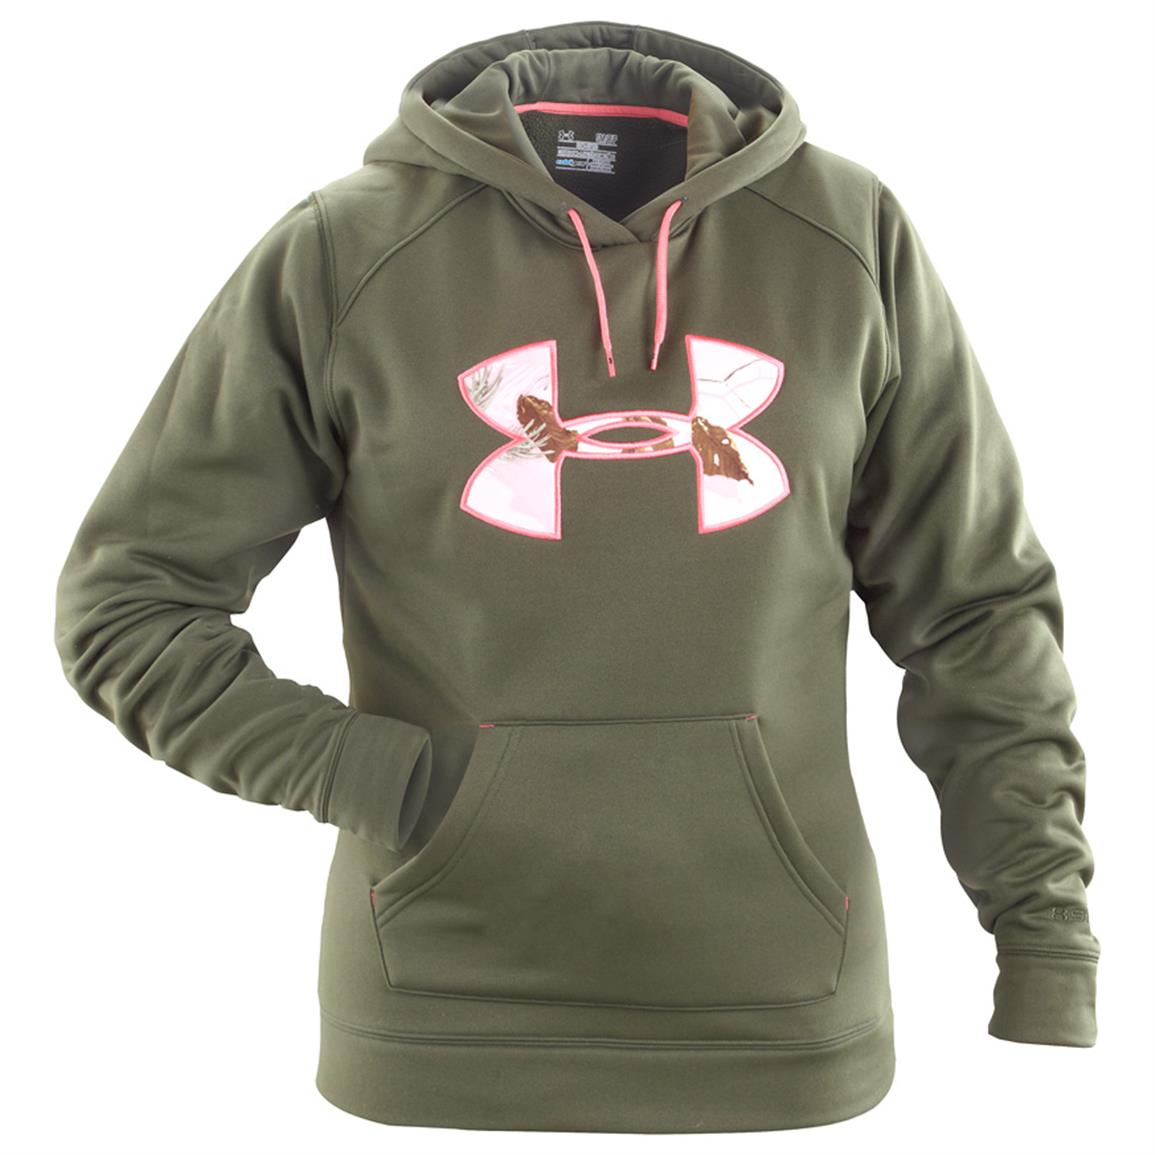 clearance under armour sweatshirts